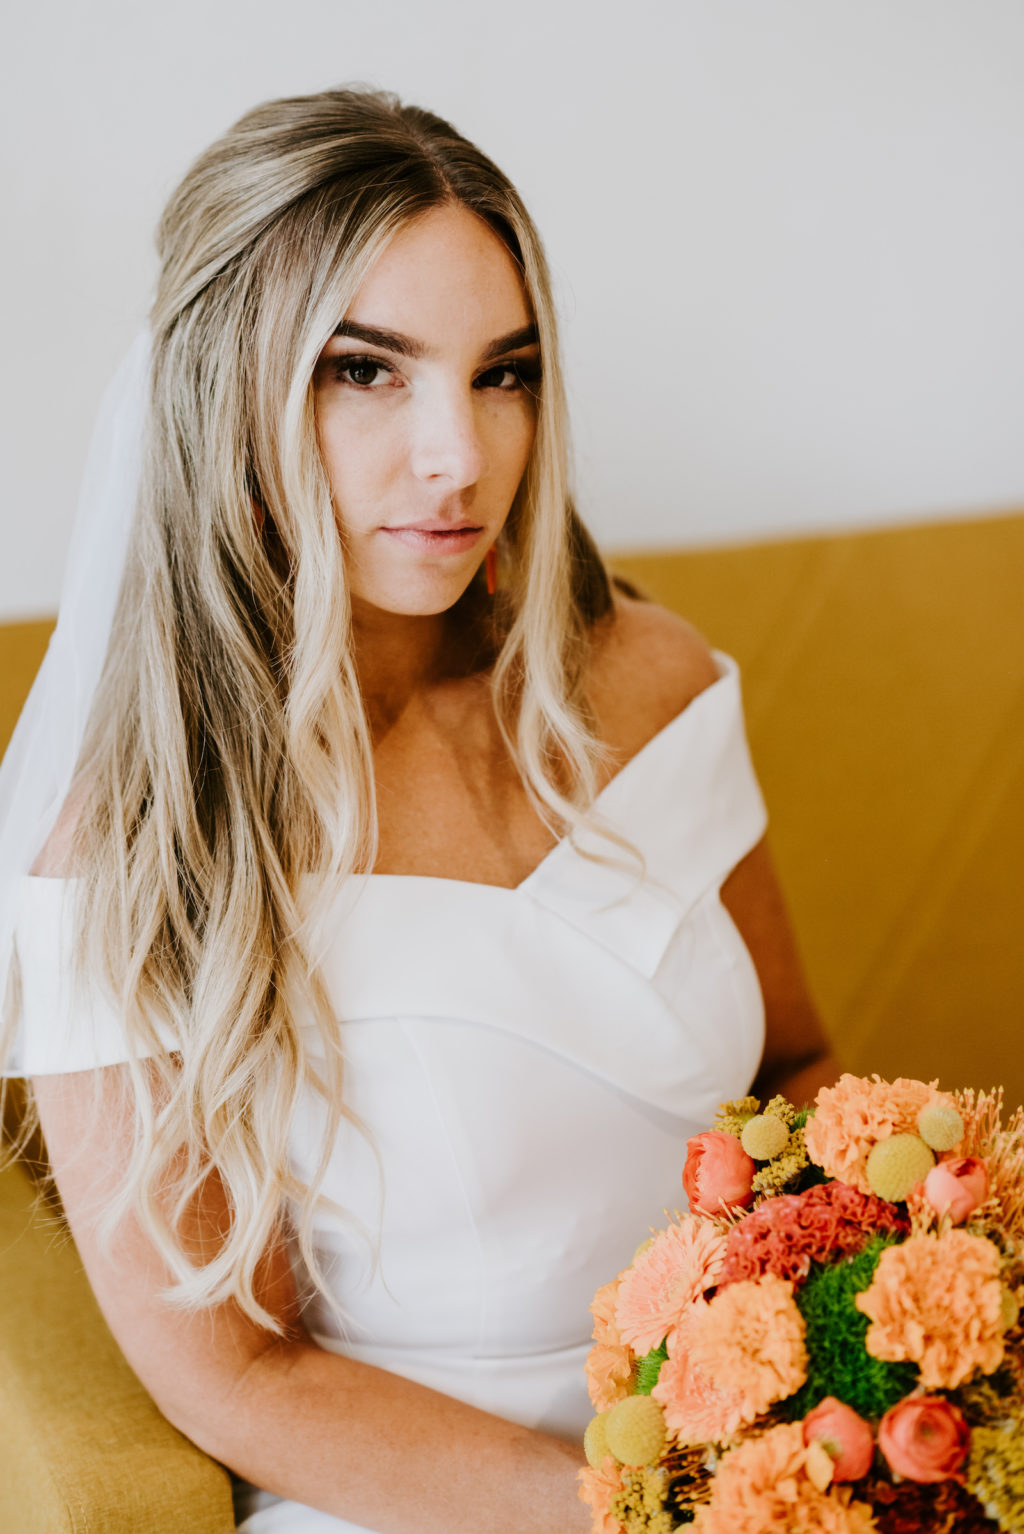 Mid Century Modern Bride with Hair Half Up Wearing Off the Shoulder Wedding Dress Holding Retro Orange and Yellow Floral Bouquet | Savannah Olivia Beauty Boutique